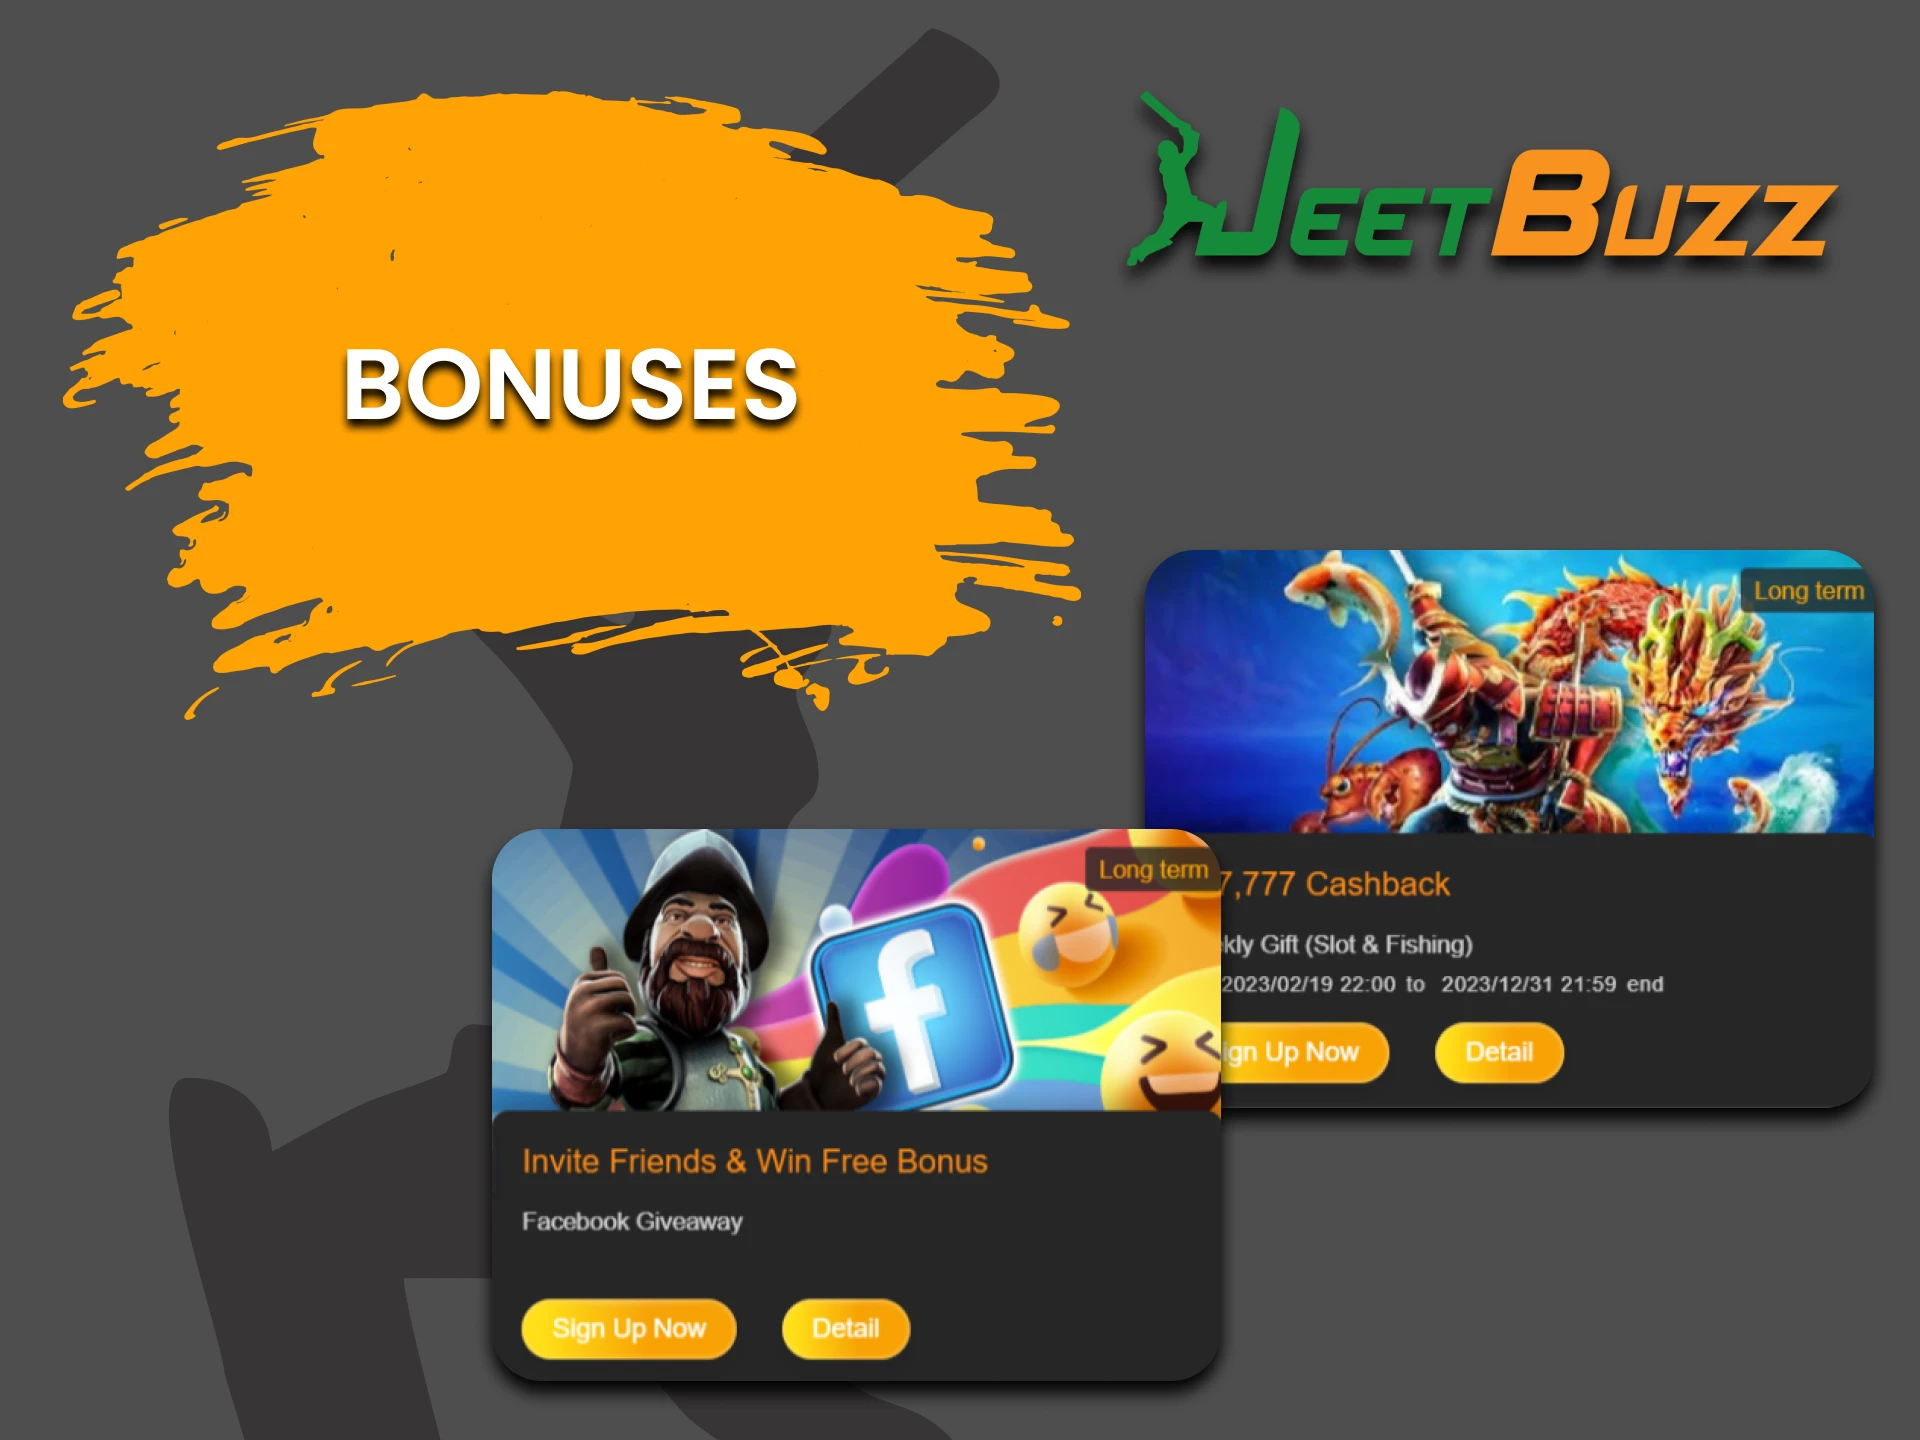 JeetBuzz is giving away bonuses for games.